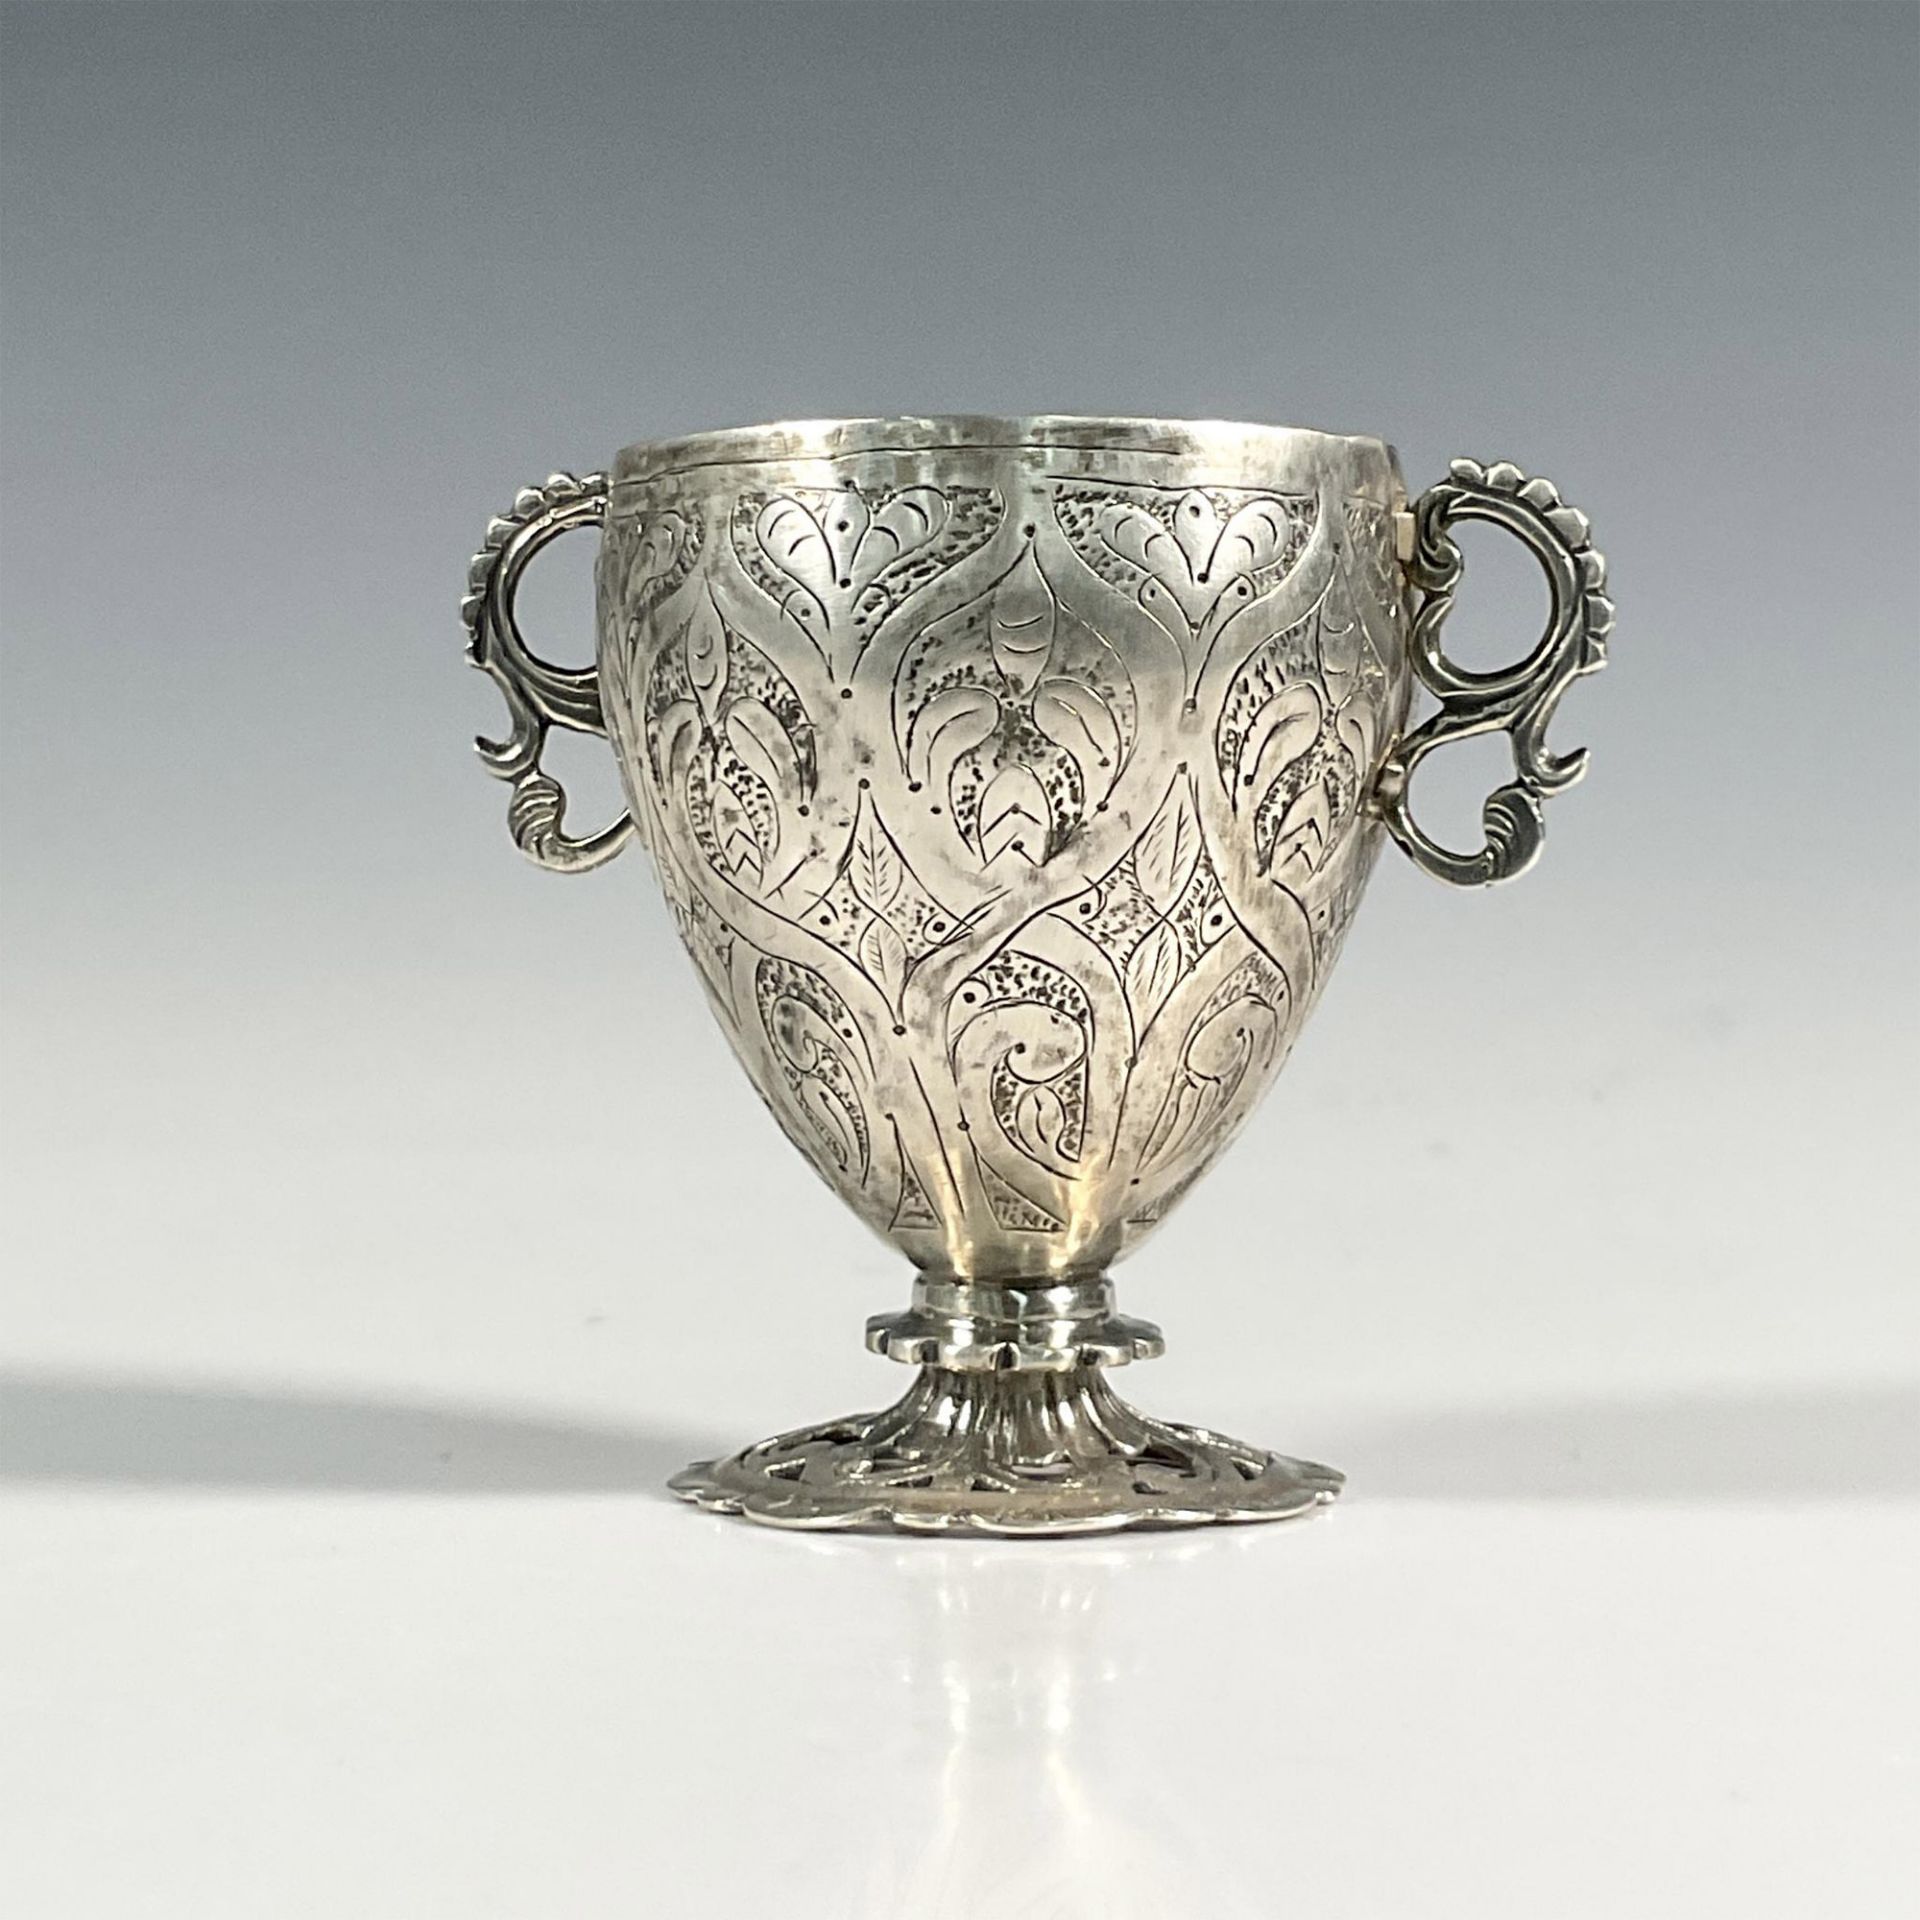 South American 19th Century Colonial Silver JICARA Cup - Image 2 of 3